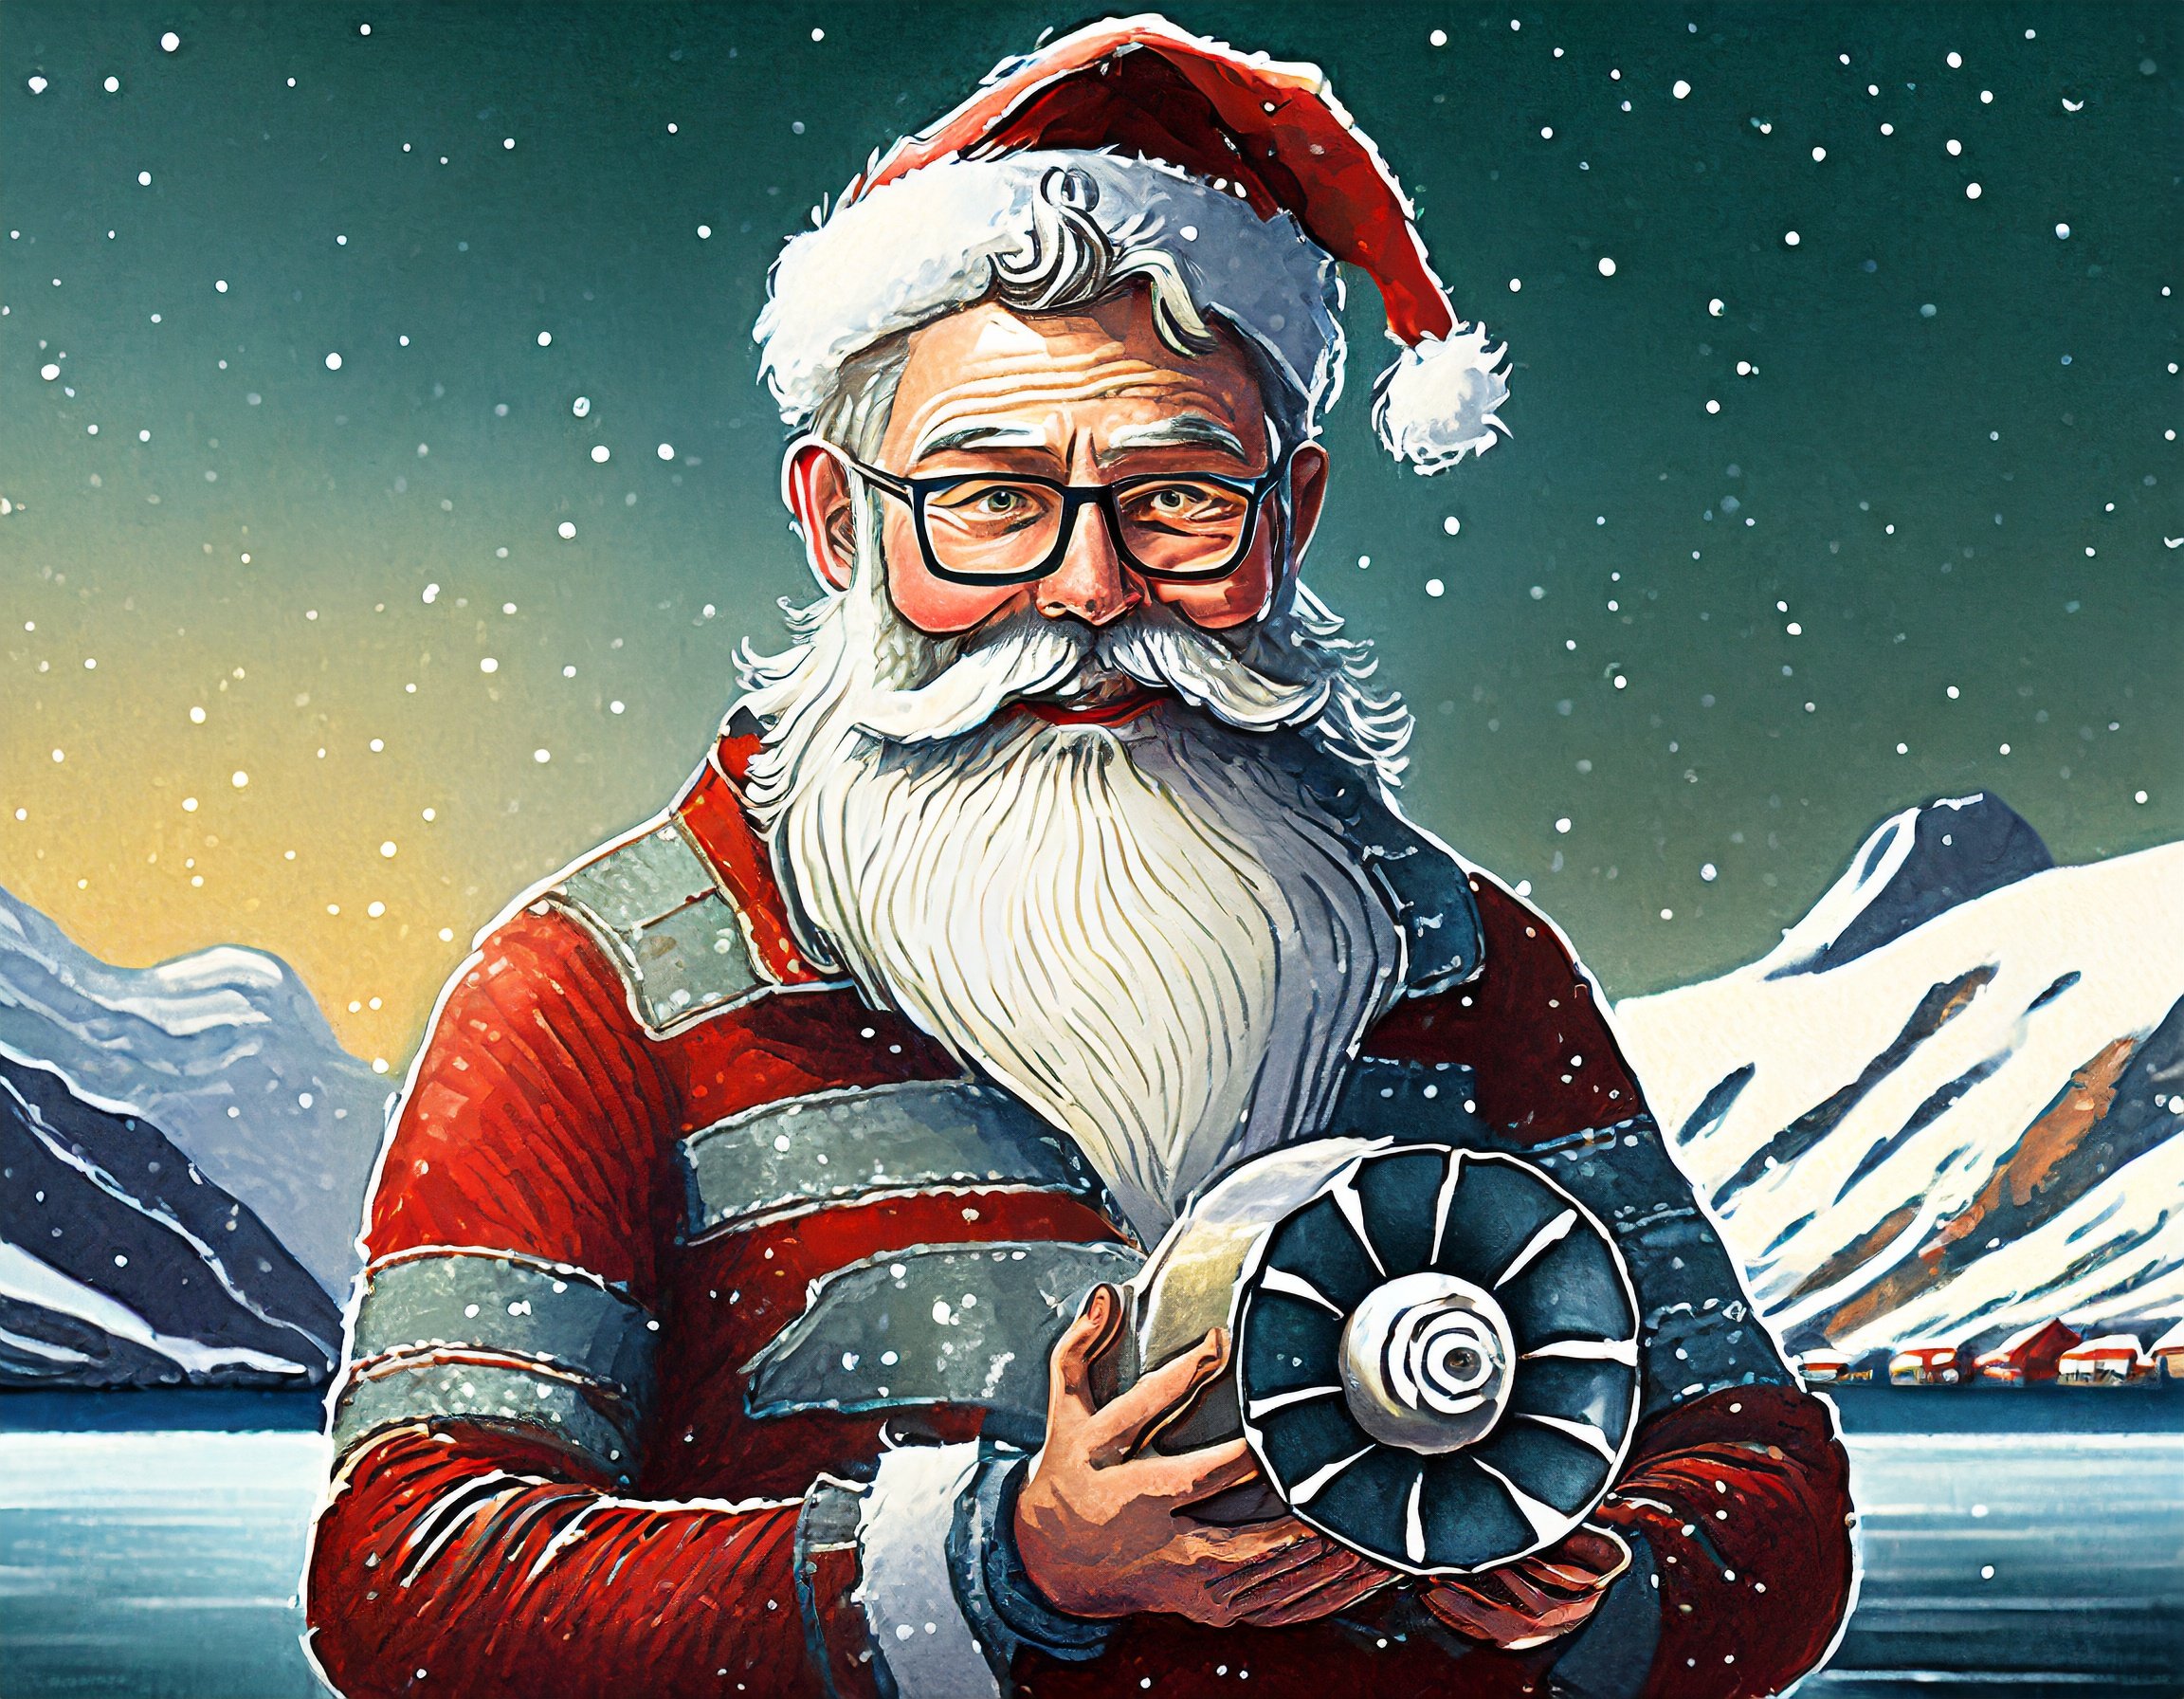 Firefly marine propulsion supplier christmas greeting from Finnøy Gear & Propeller AS located at Fin.jpg